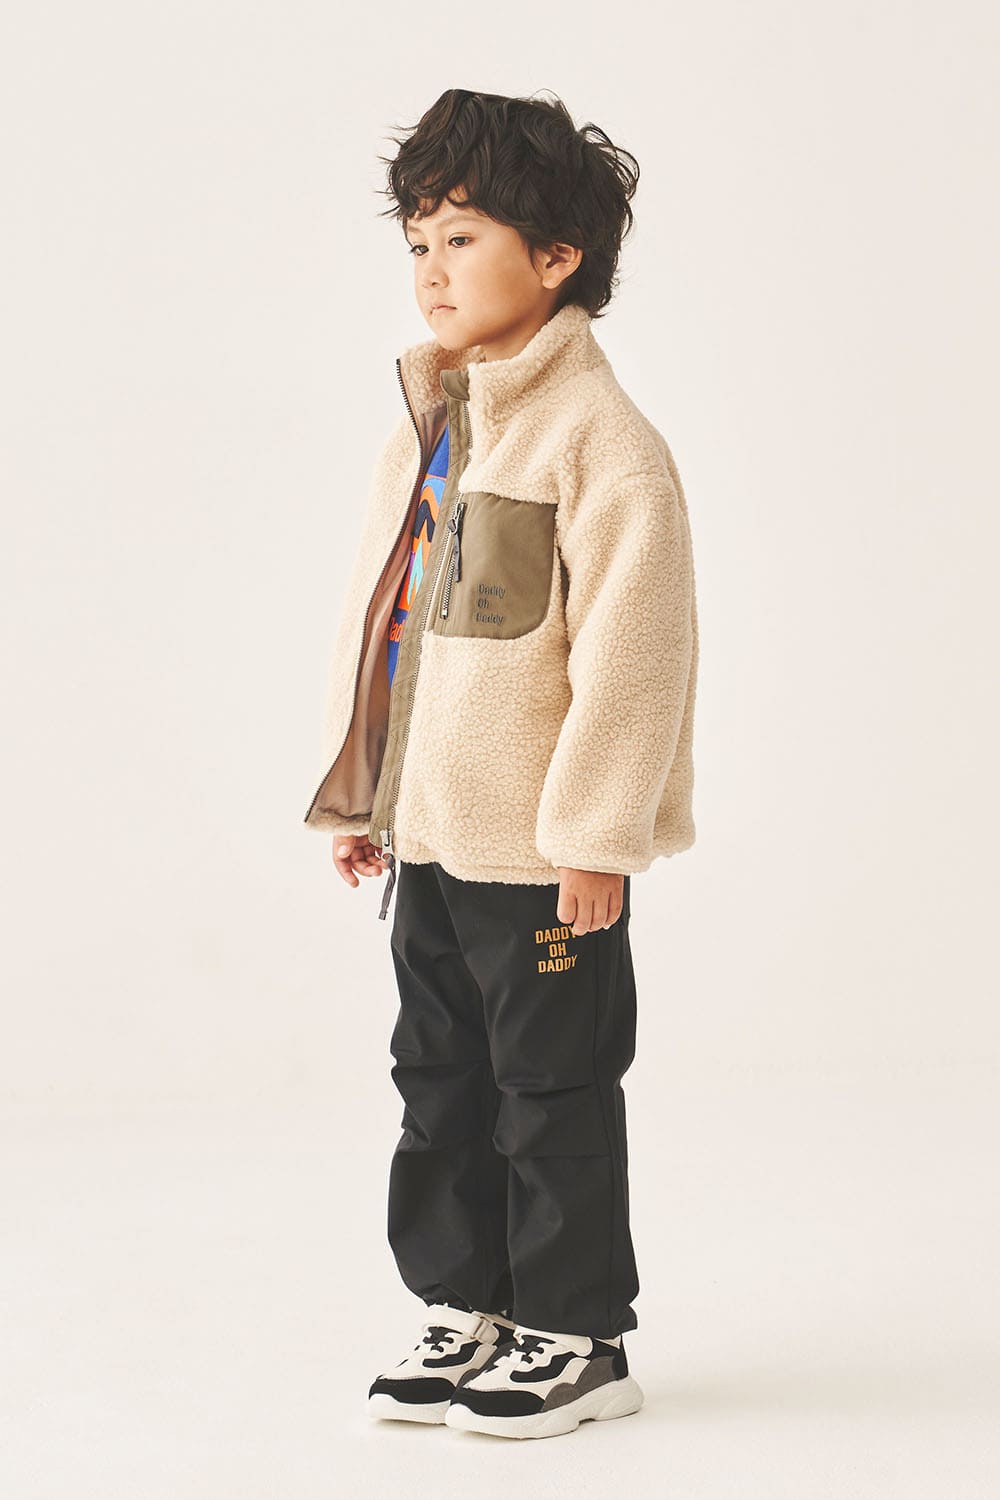 2023 AUTUMN&WINTER Daddy Oh Daddy STYLE19